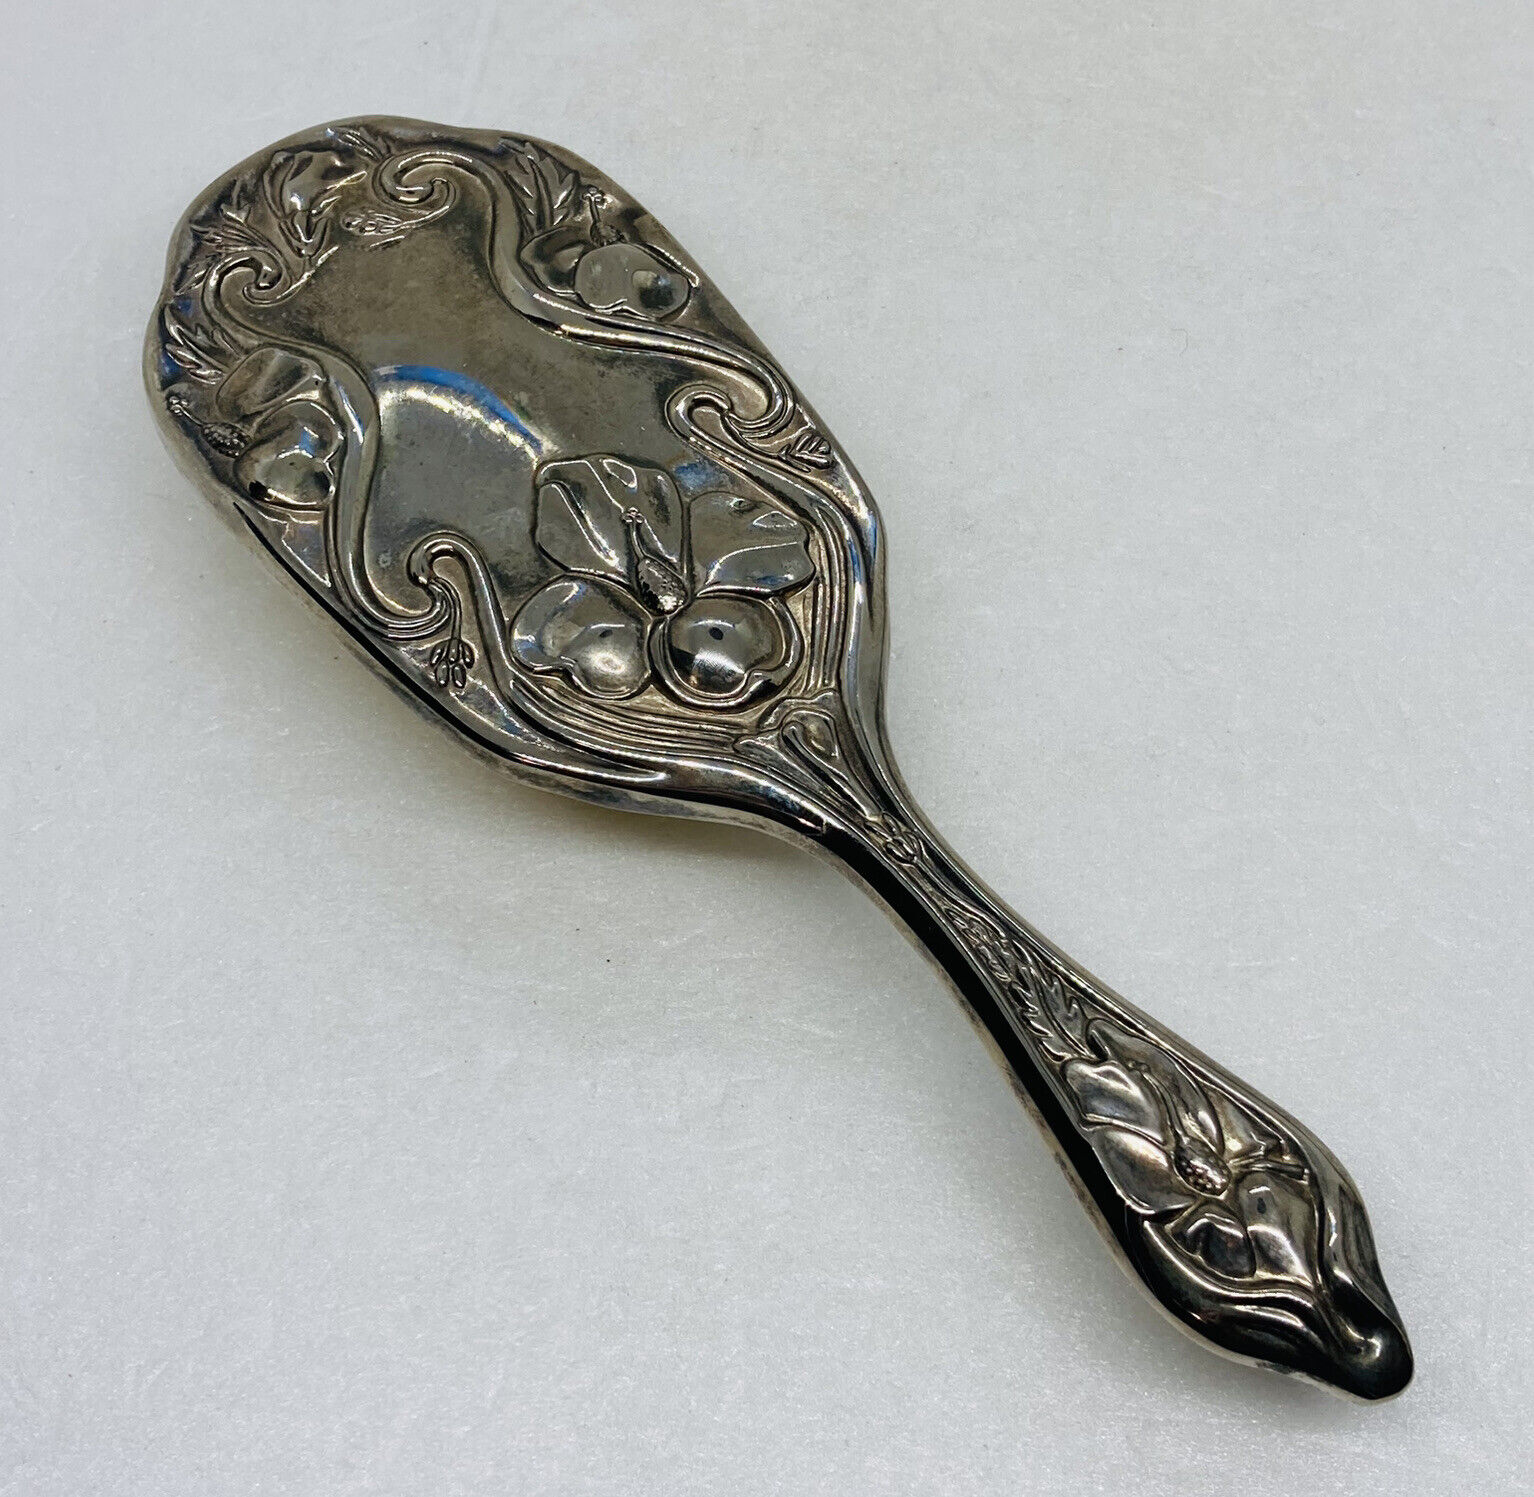 Vintage 1950s Silver Plated Hairbrush Ornate Floral Handle 8” Art Decor 6